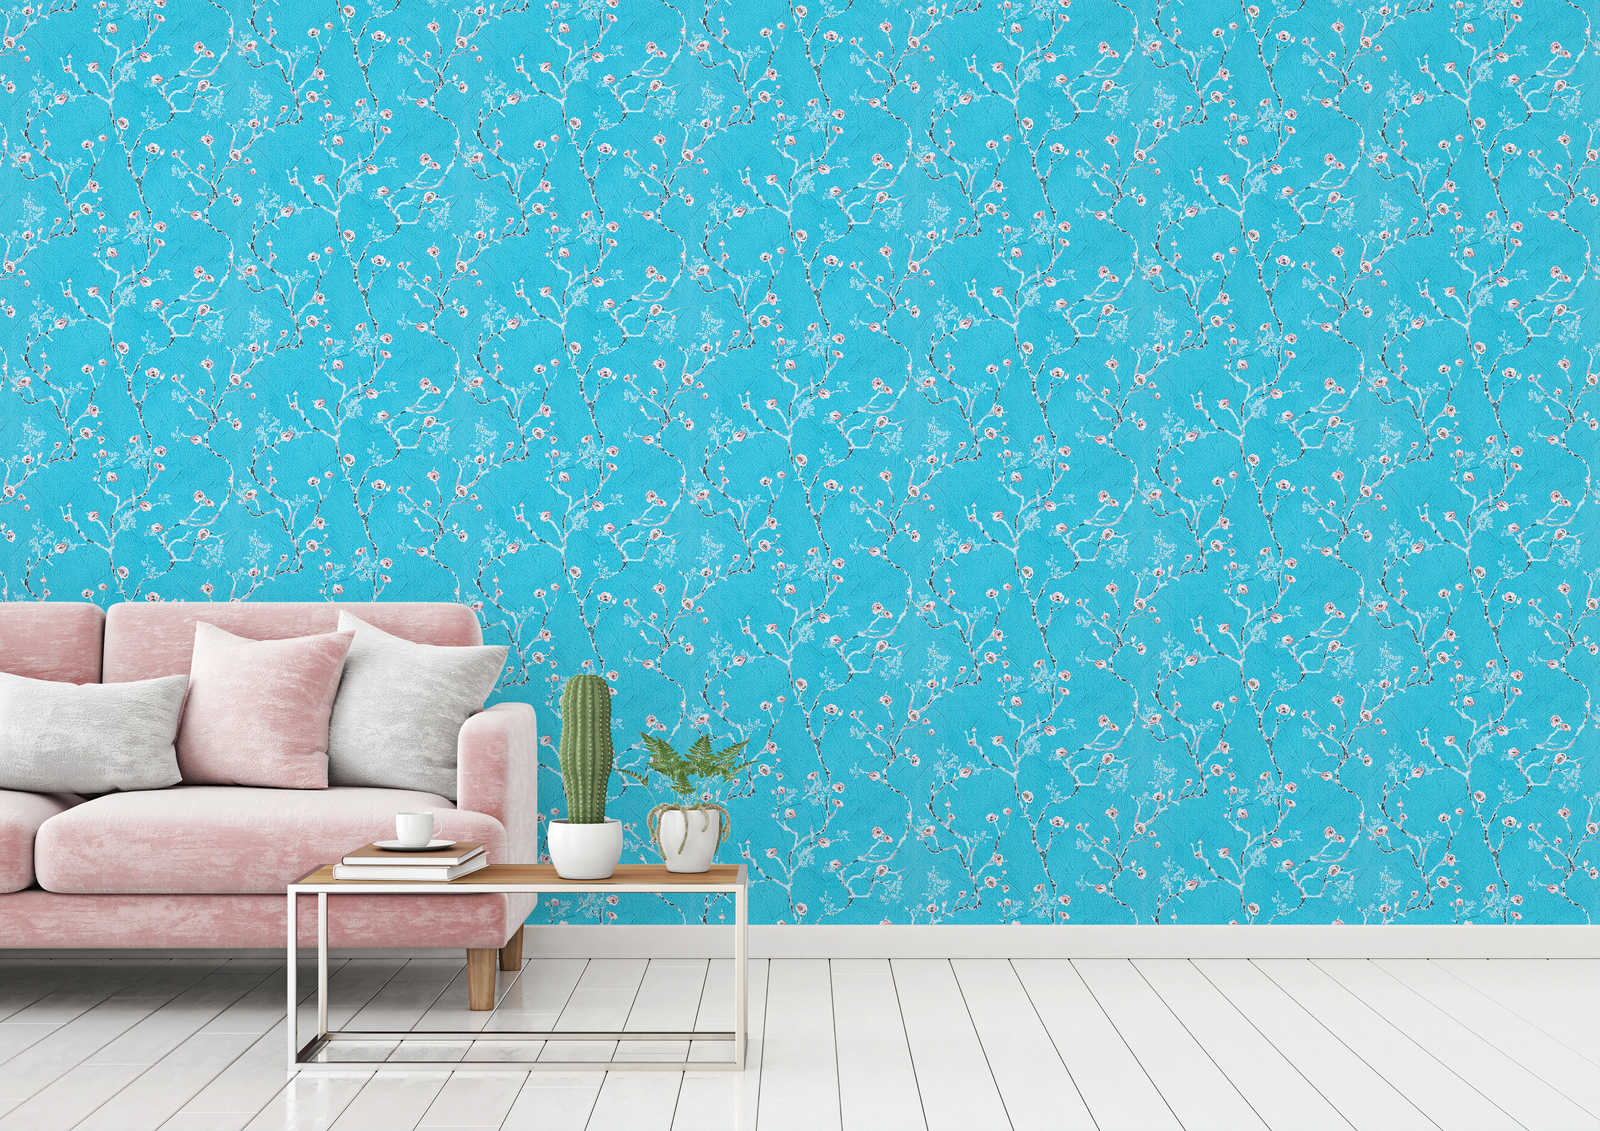             Blue wallpaper with cherry blossom pattern in Japan style
        